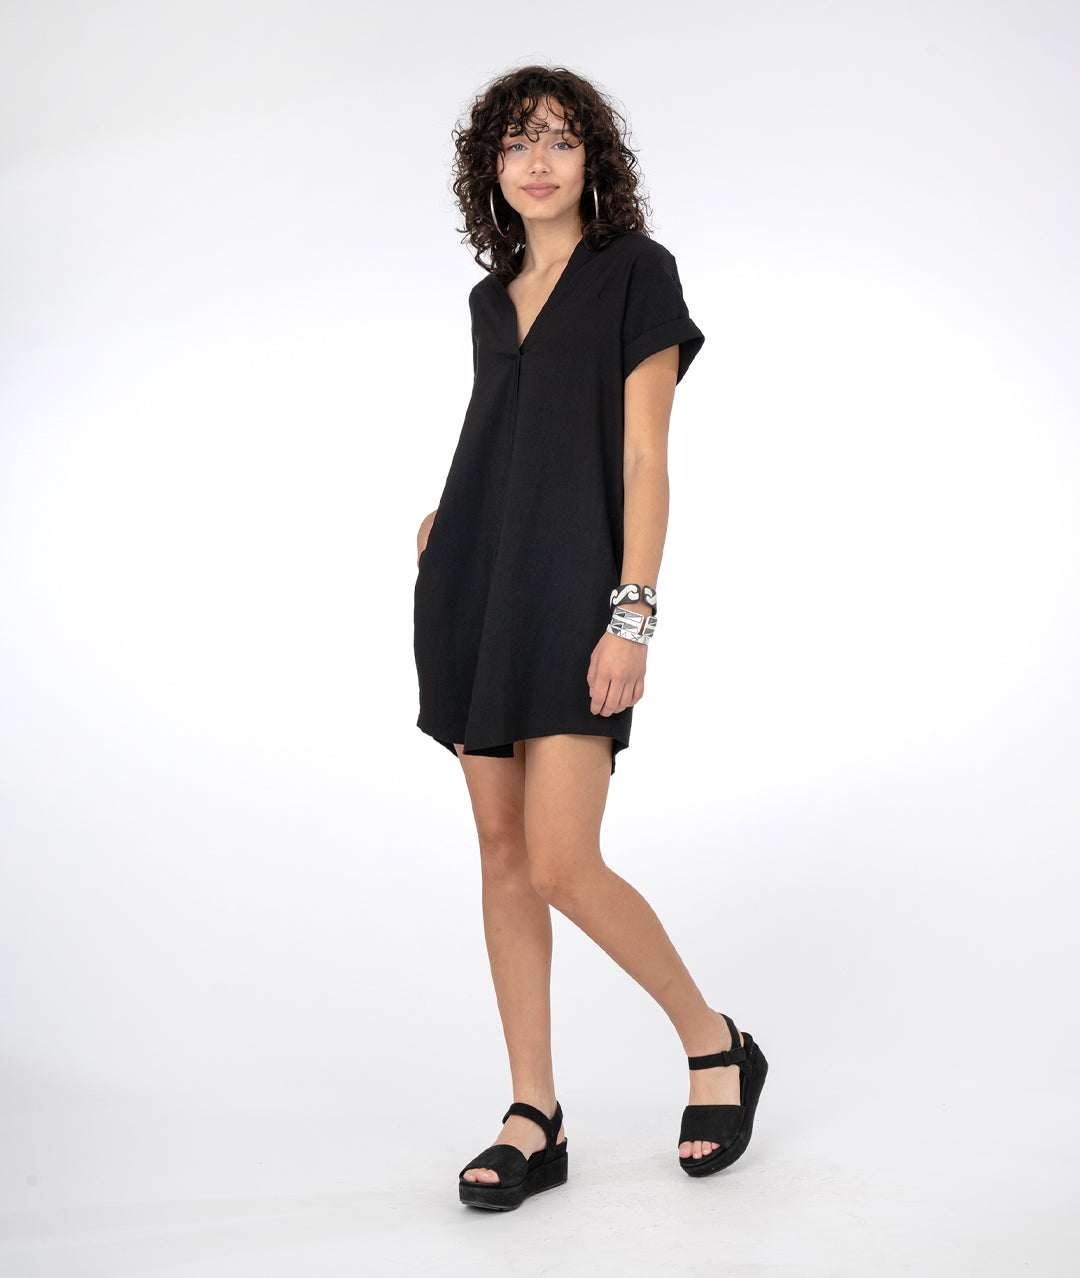 model in a boxy black dress with short cuffed sleeves and a vneck